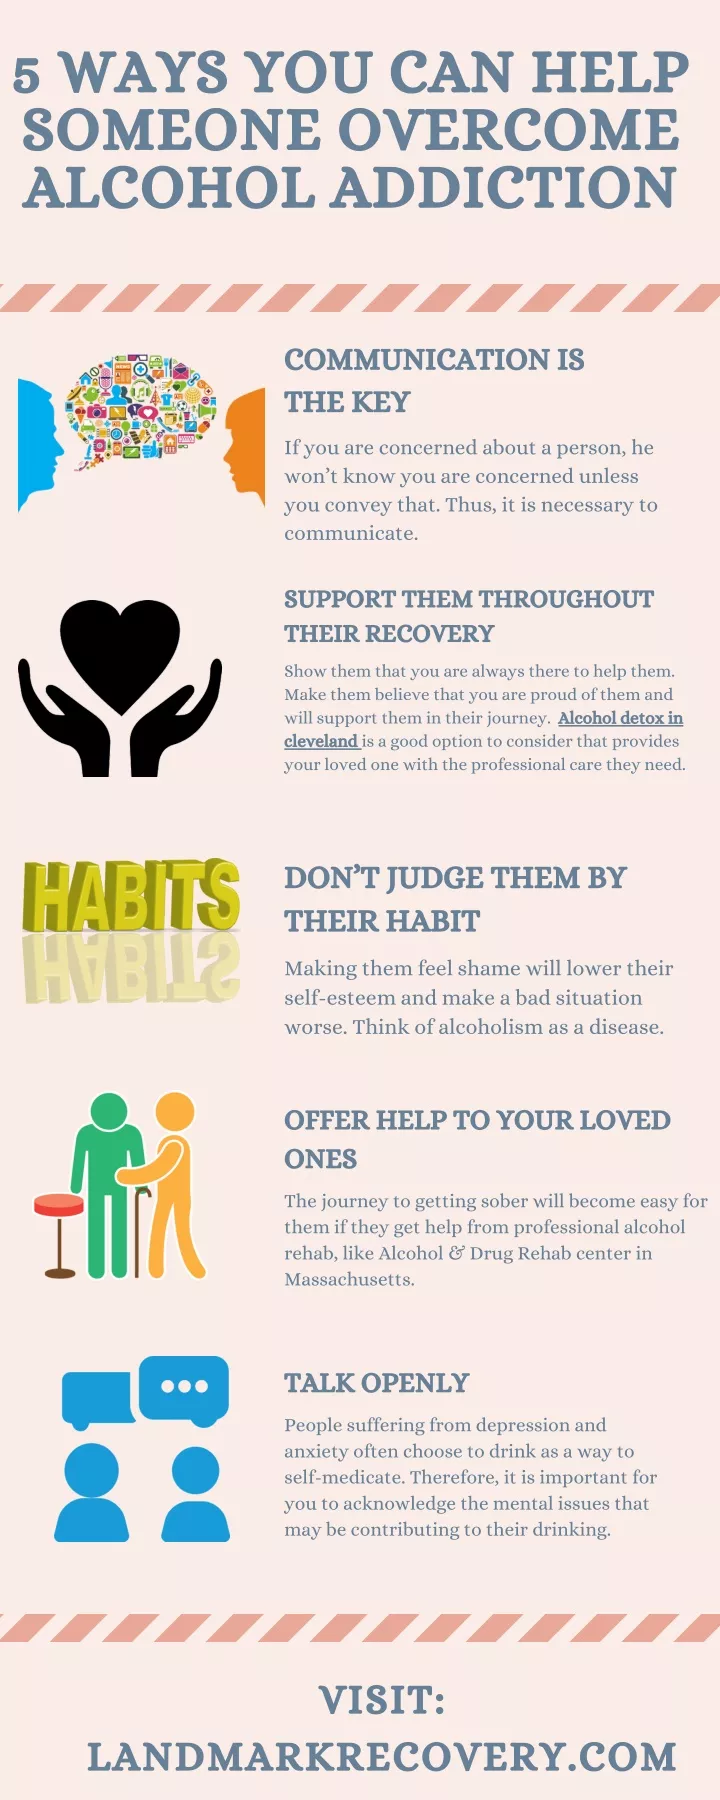 5 ways you can help someone overcome alcohol